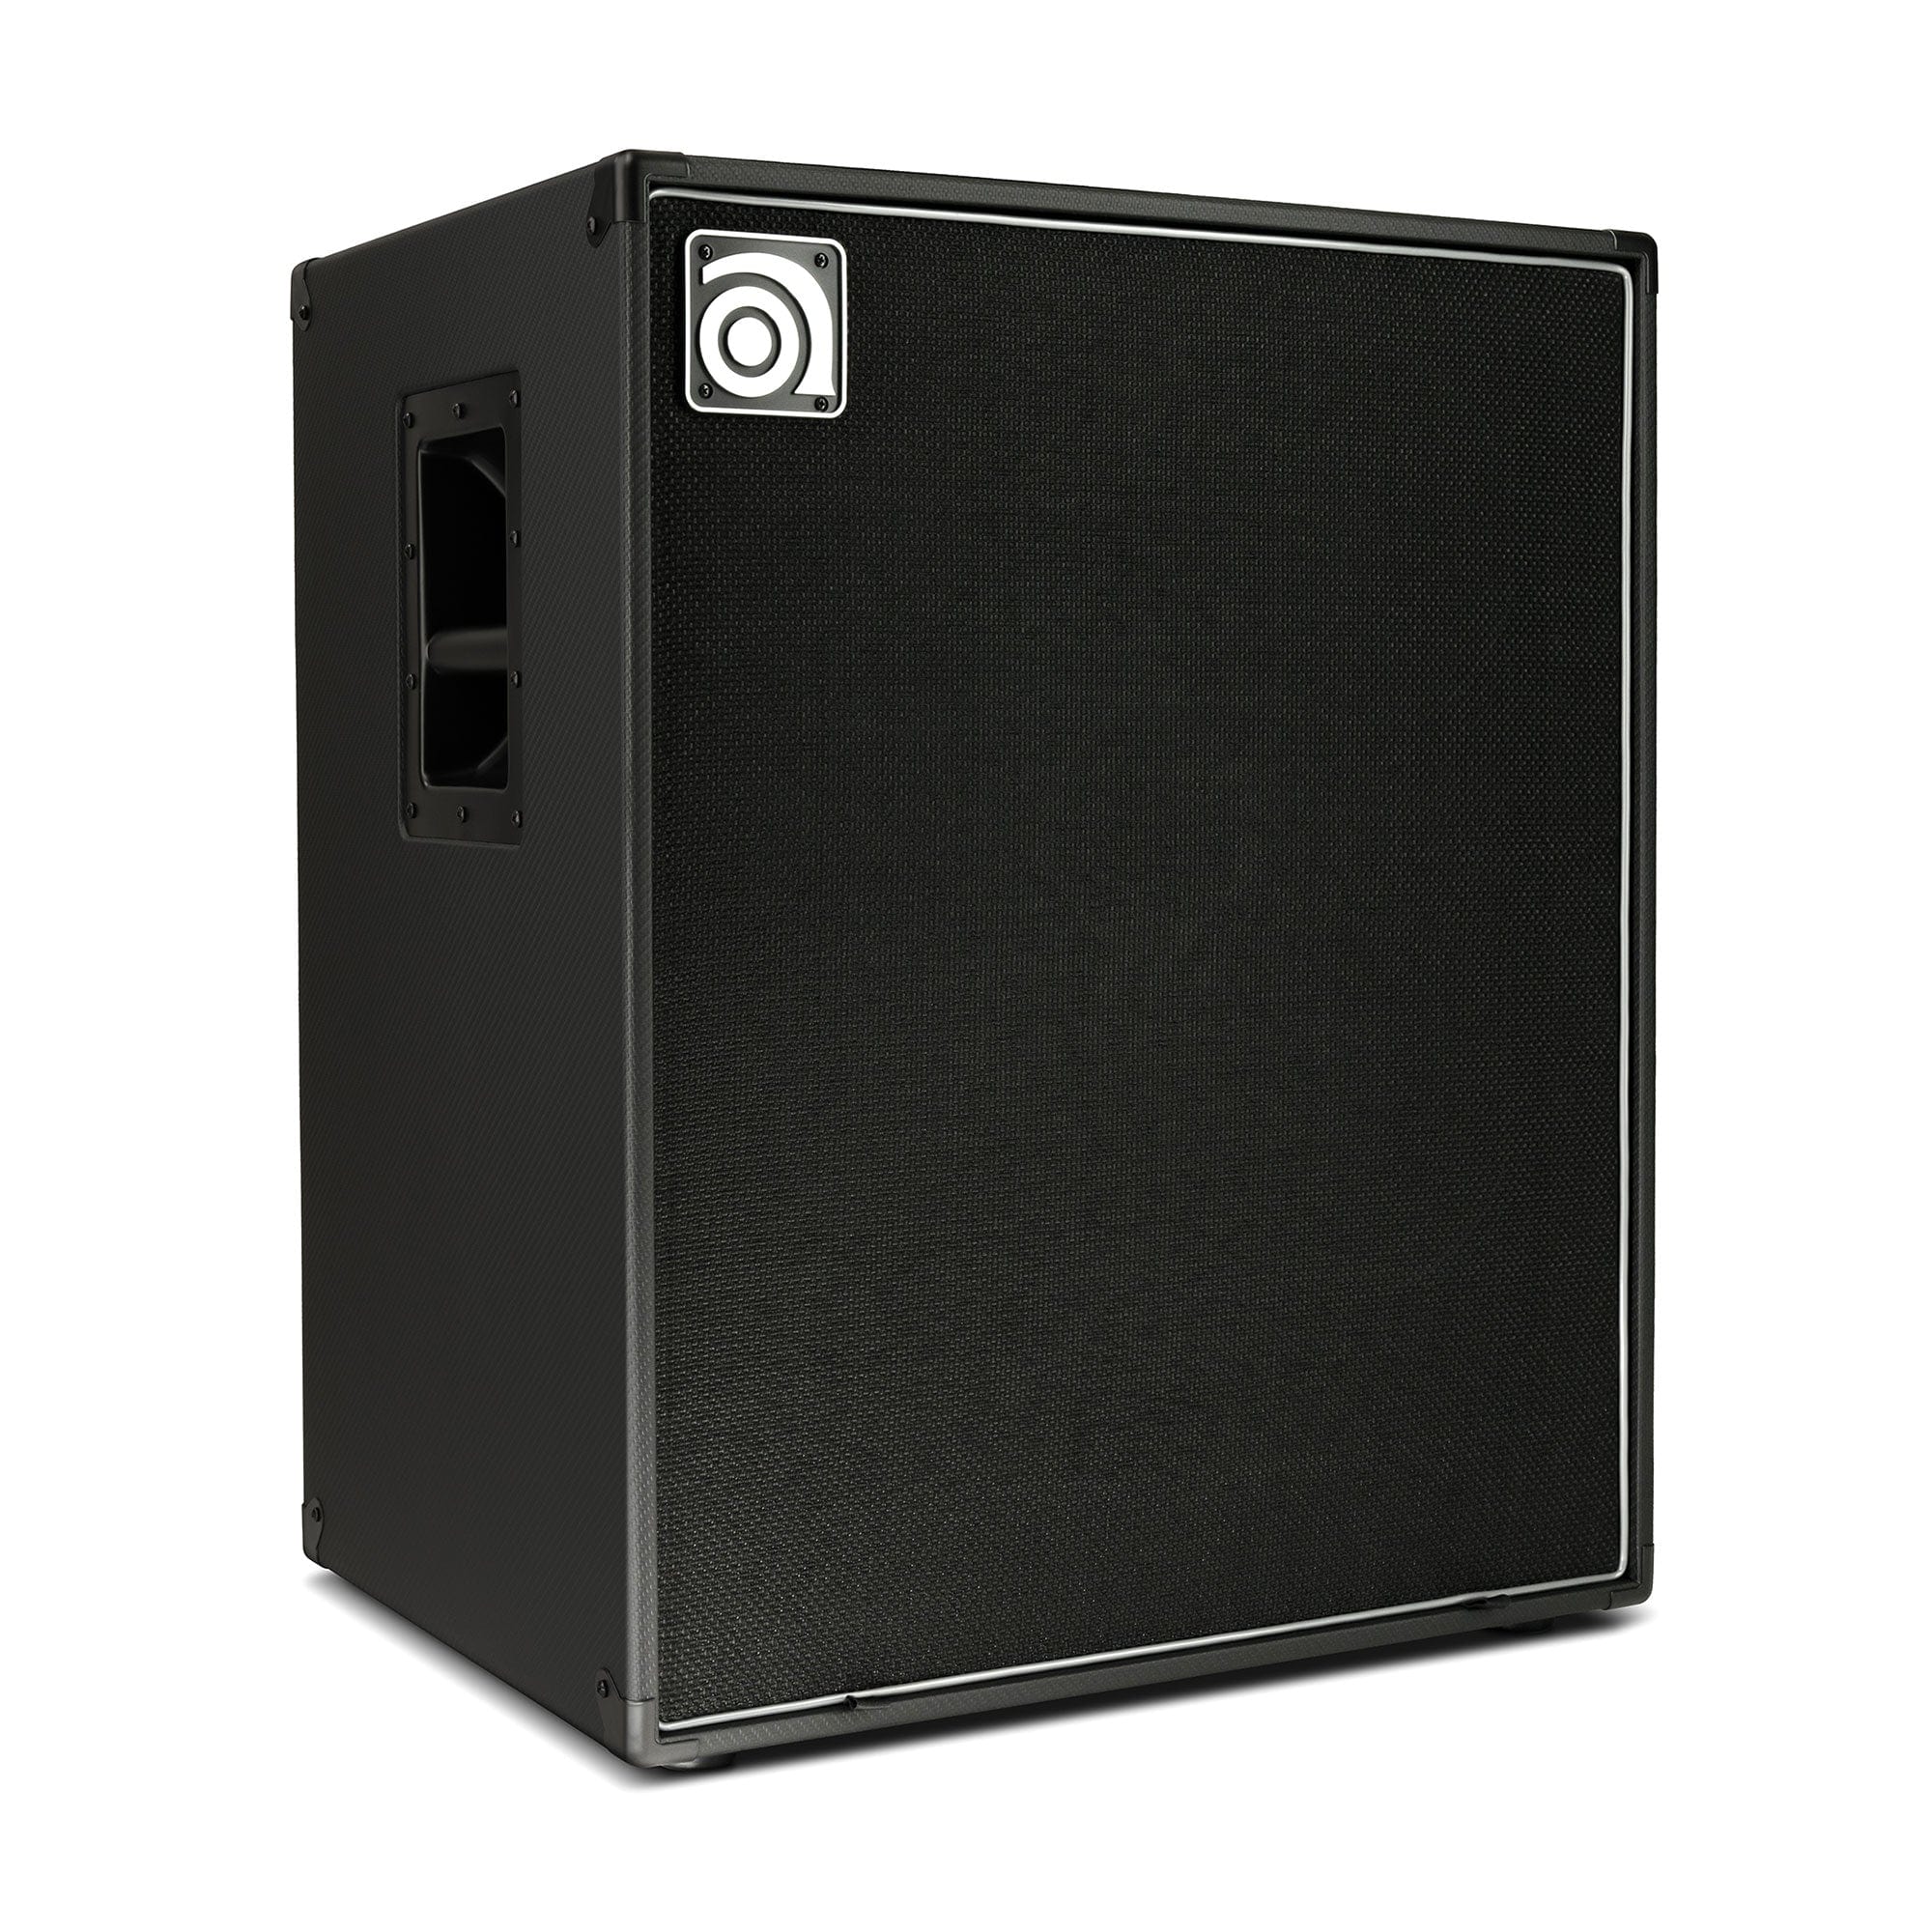 Ampeg Venture VB-410 4x10 Bass Amp Cabinet Amps / Bass Cabinets